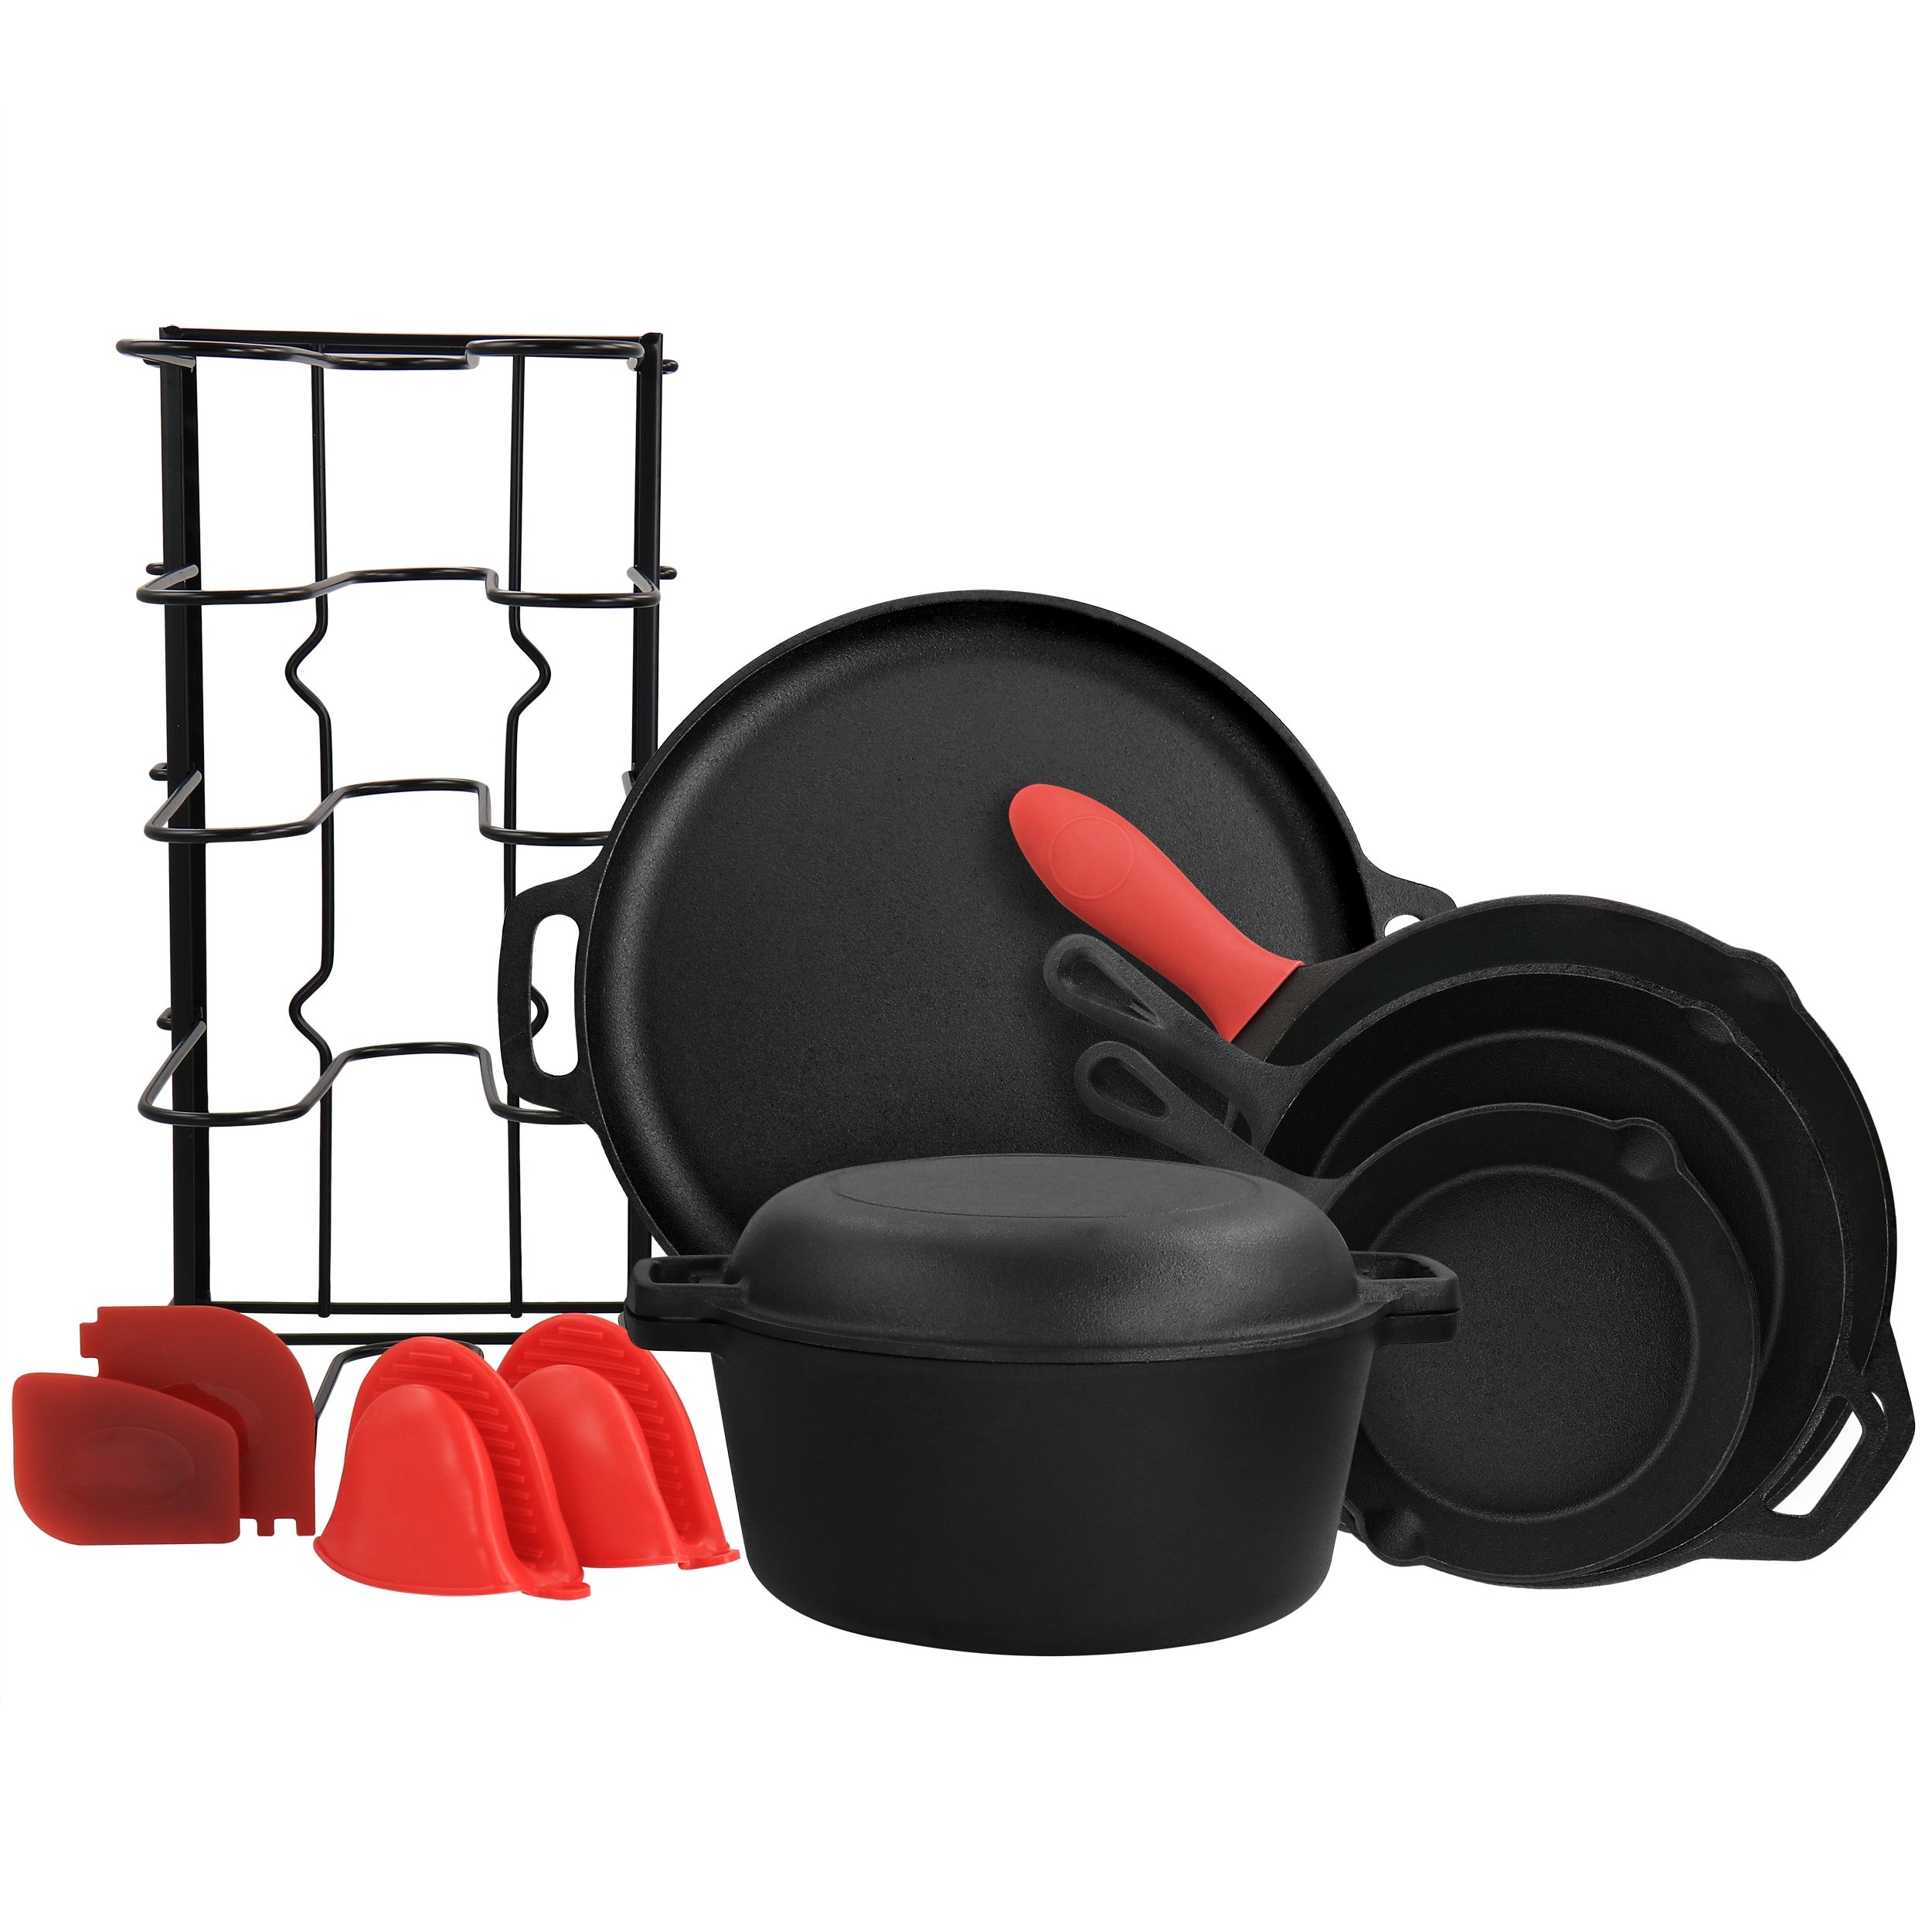 https://ak1.ostkcdn.com/images/products/is/images/direct/cb18ee4dc40cda31d9caeeb58b70dafb84eb4d97/Cast-Iron-Pre-Seasoned-Skillet-and-Accessories-12-Piece-Set.jpg